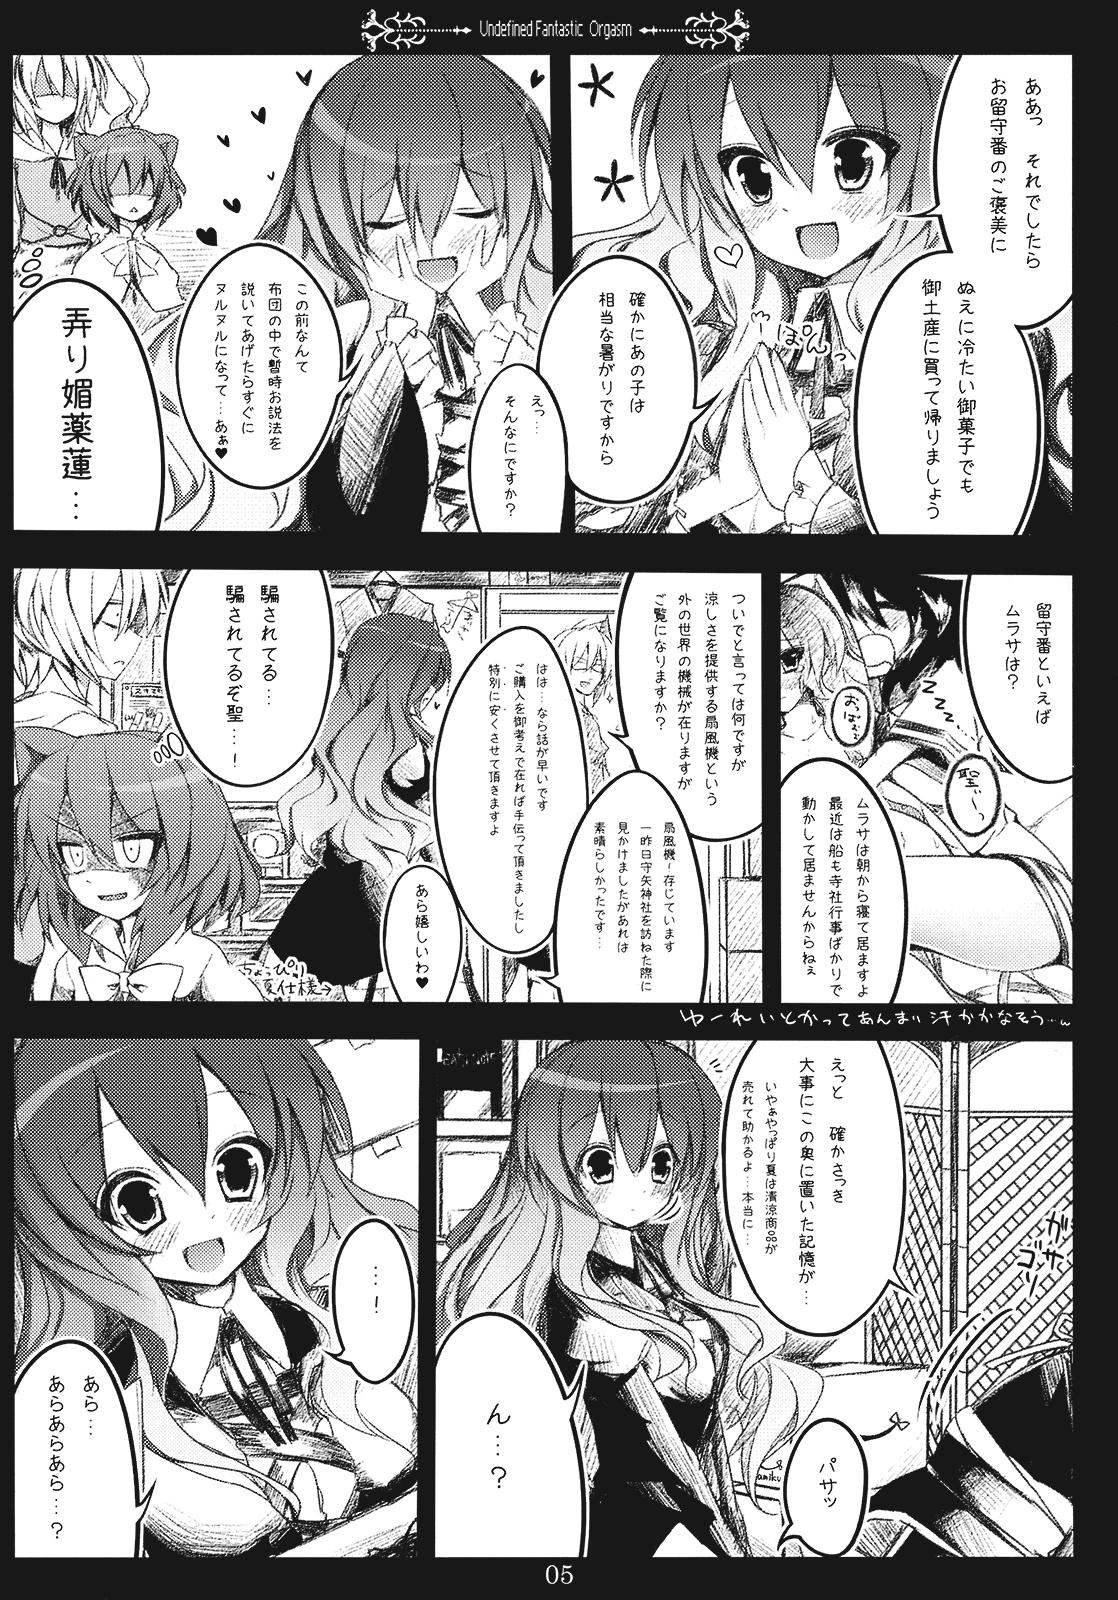 Mama Undefined Fantastic Orgasm - Touhou project Matures - Page 5